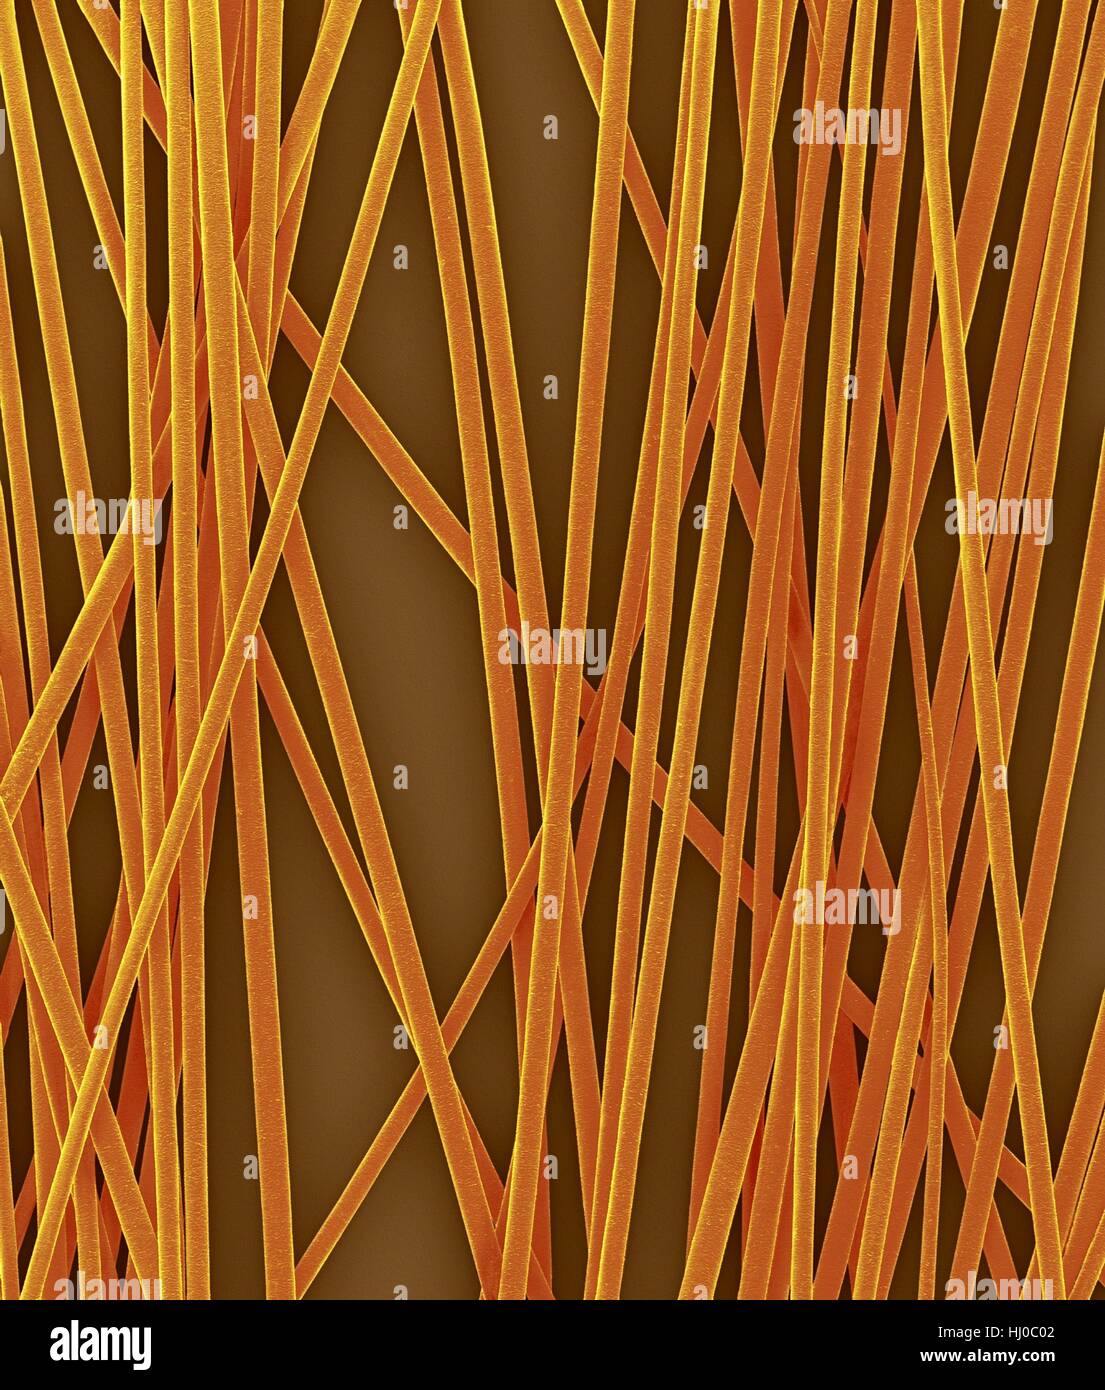 Human hair shafts from head,coloured scanning electron micrograph (SEM).The outer layer of hair (the cuticle) has overlapping scales of keratin.These scales are thought to prevent hairs from matting together.Hair is made up of fibrous protein called keratin.Internally hair shaft is divided into three concentric sheaths (layers) called medulla,cortex outer cuticle.Hair is non-living tissue.Hair grows from hair root (bulb) embedded in skin.Hair growth occurs when epidermal cells divide at base of root bulb.Hair is non-living tissue.Magnification: X6 when shortest axis printed at 25 millimetres. Stock Photo